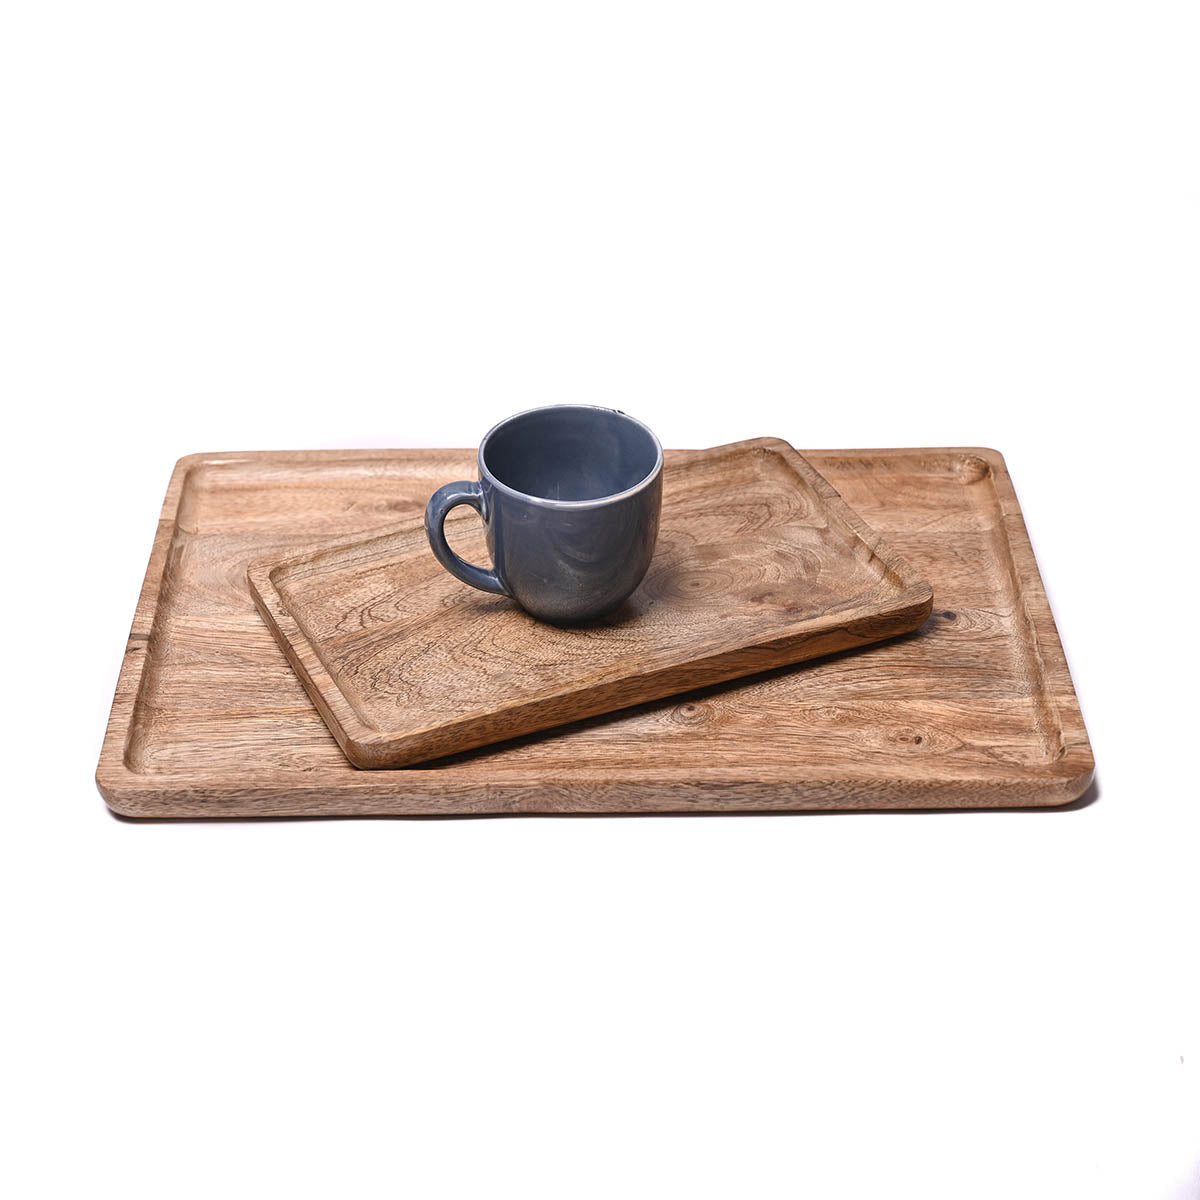 Wooden tray, round edged rustic serving tray, farmhouse decor, 6X10 inches